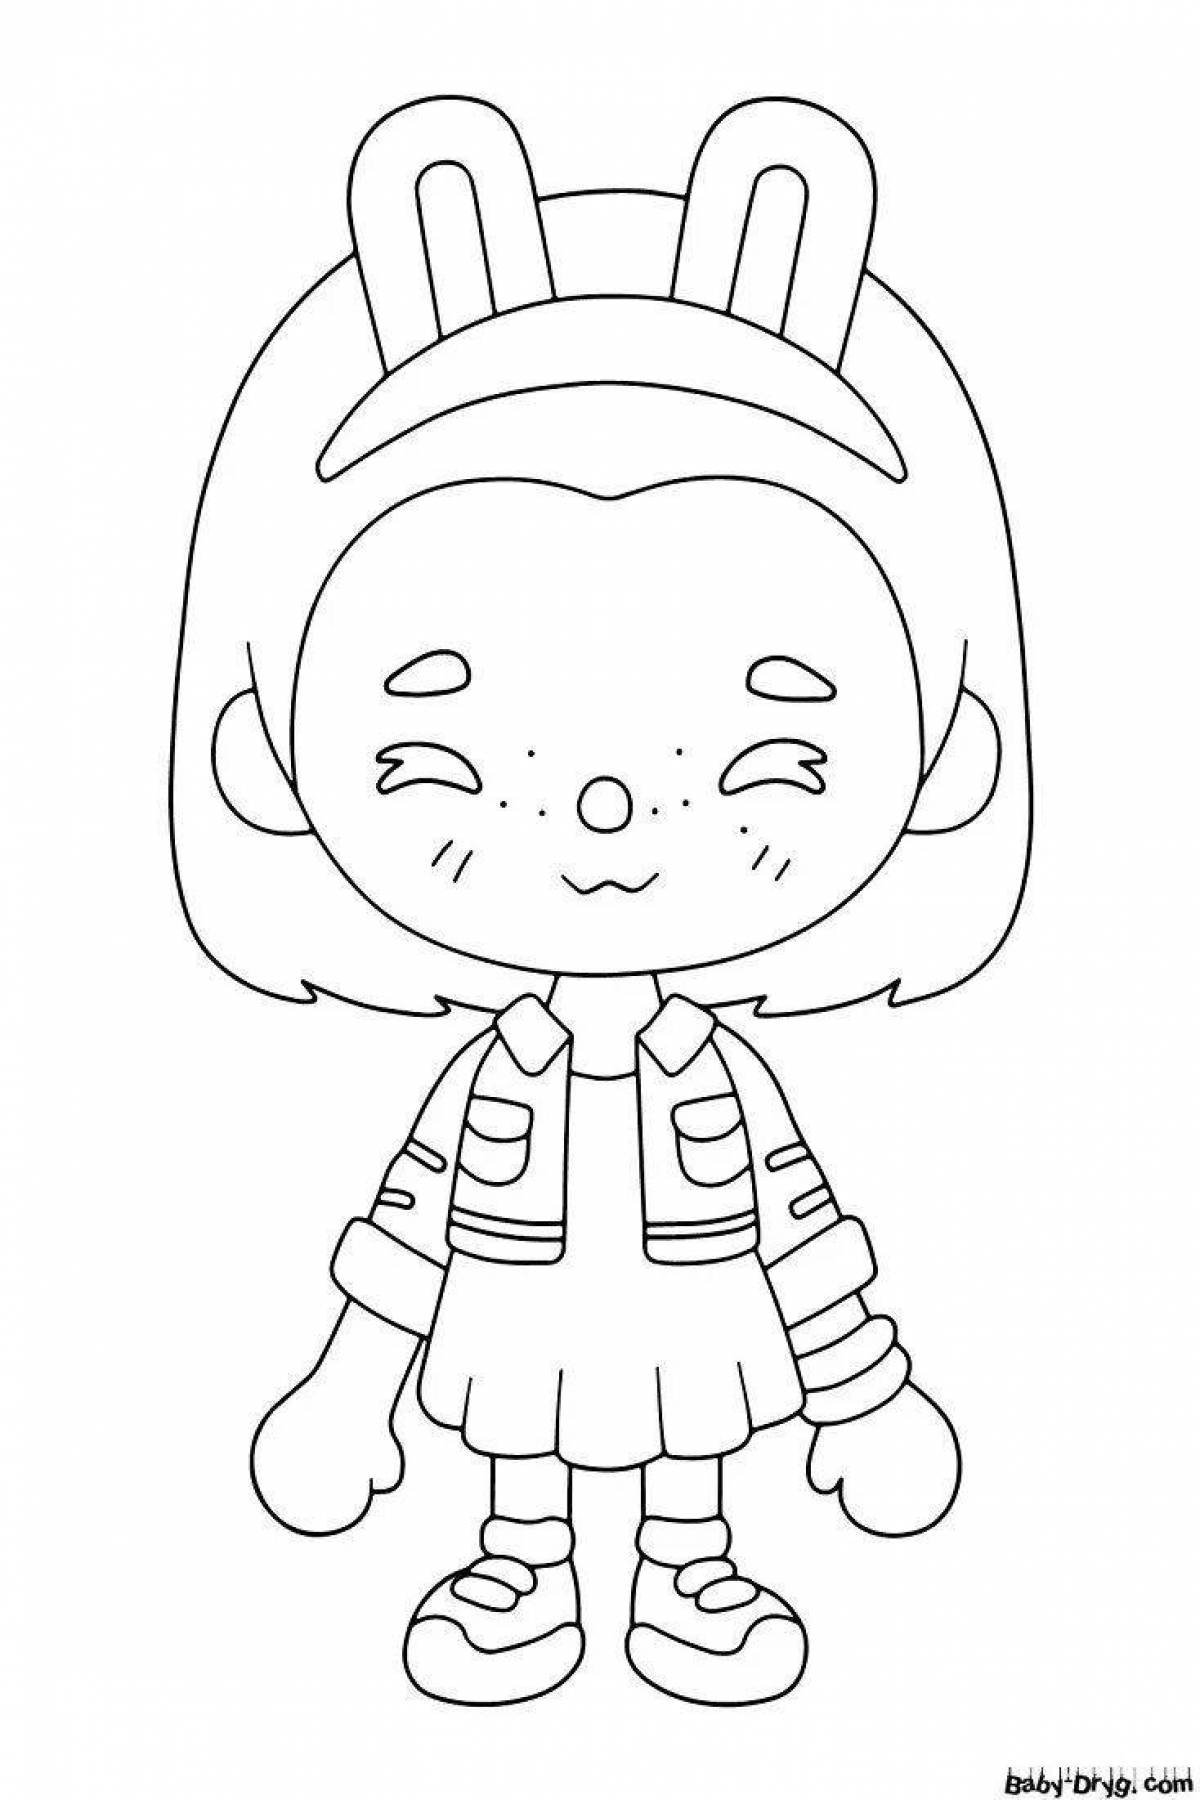 Togo boko's amazing coloring page